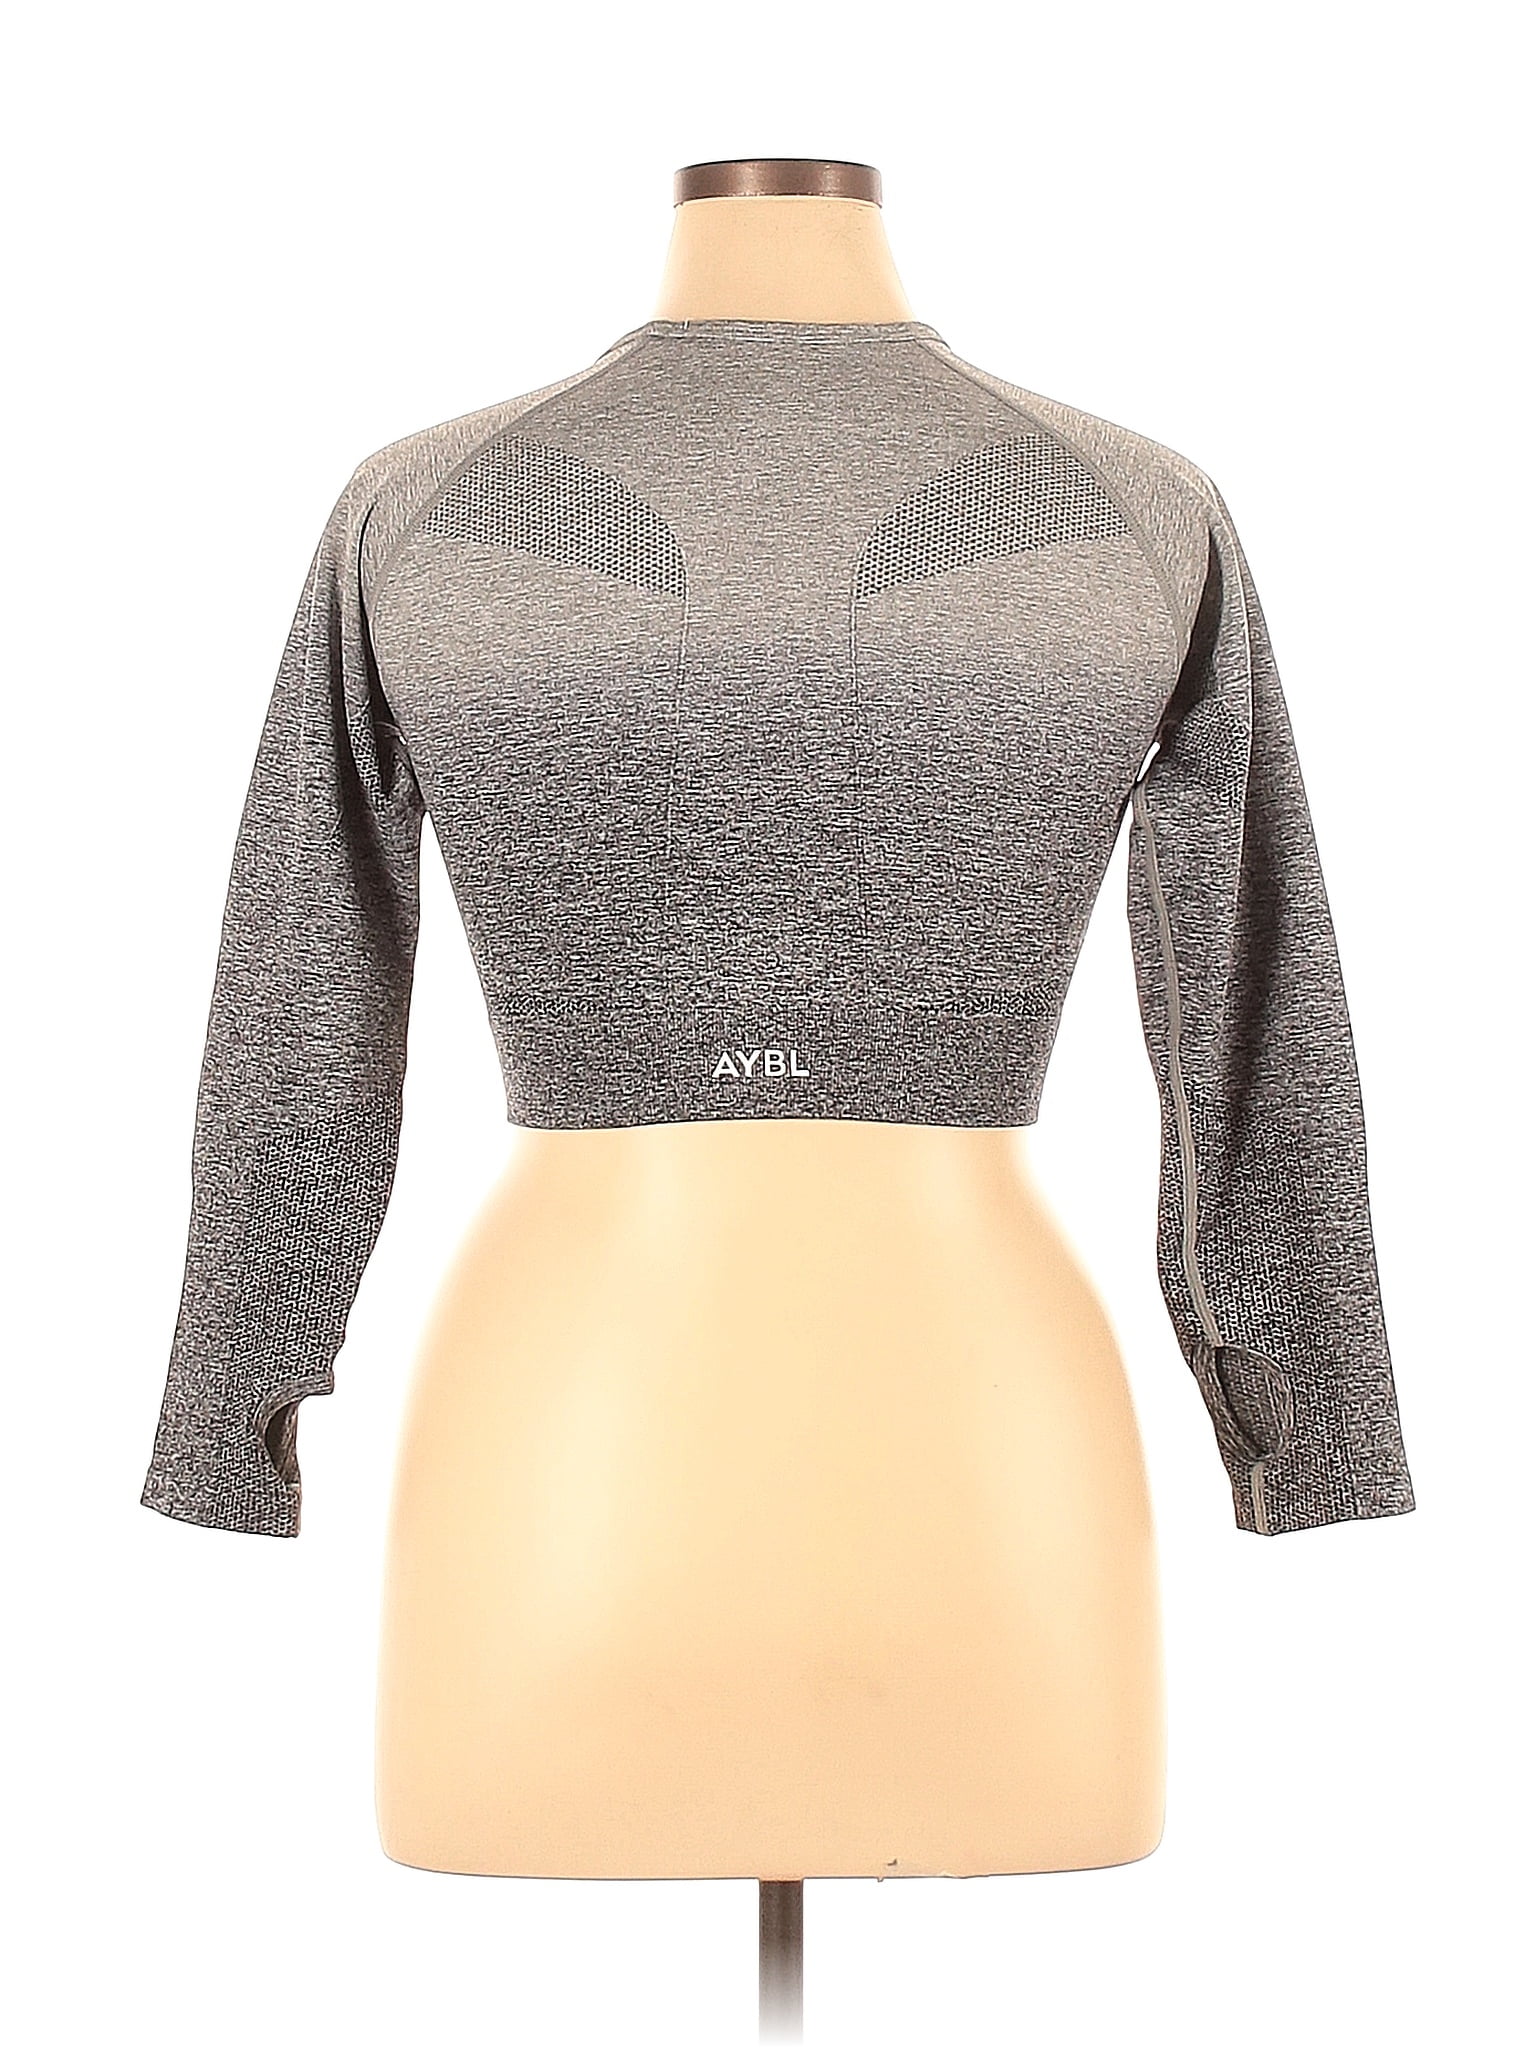 AYBL Women's Activewear On Sale Up To 90% Off Retail